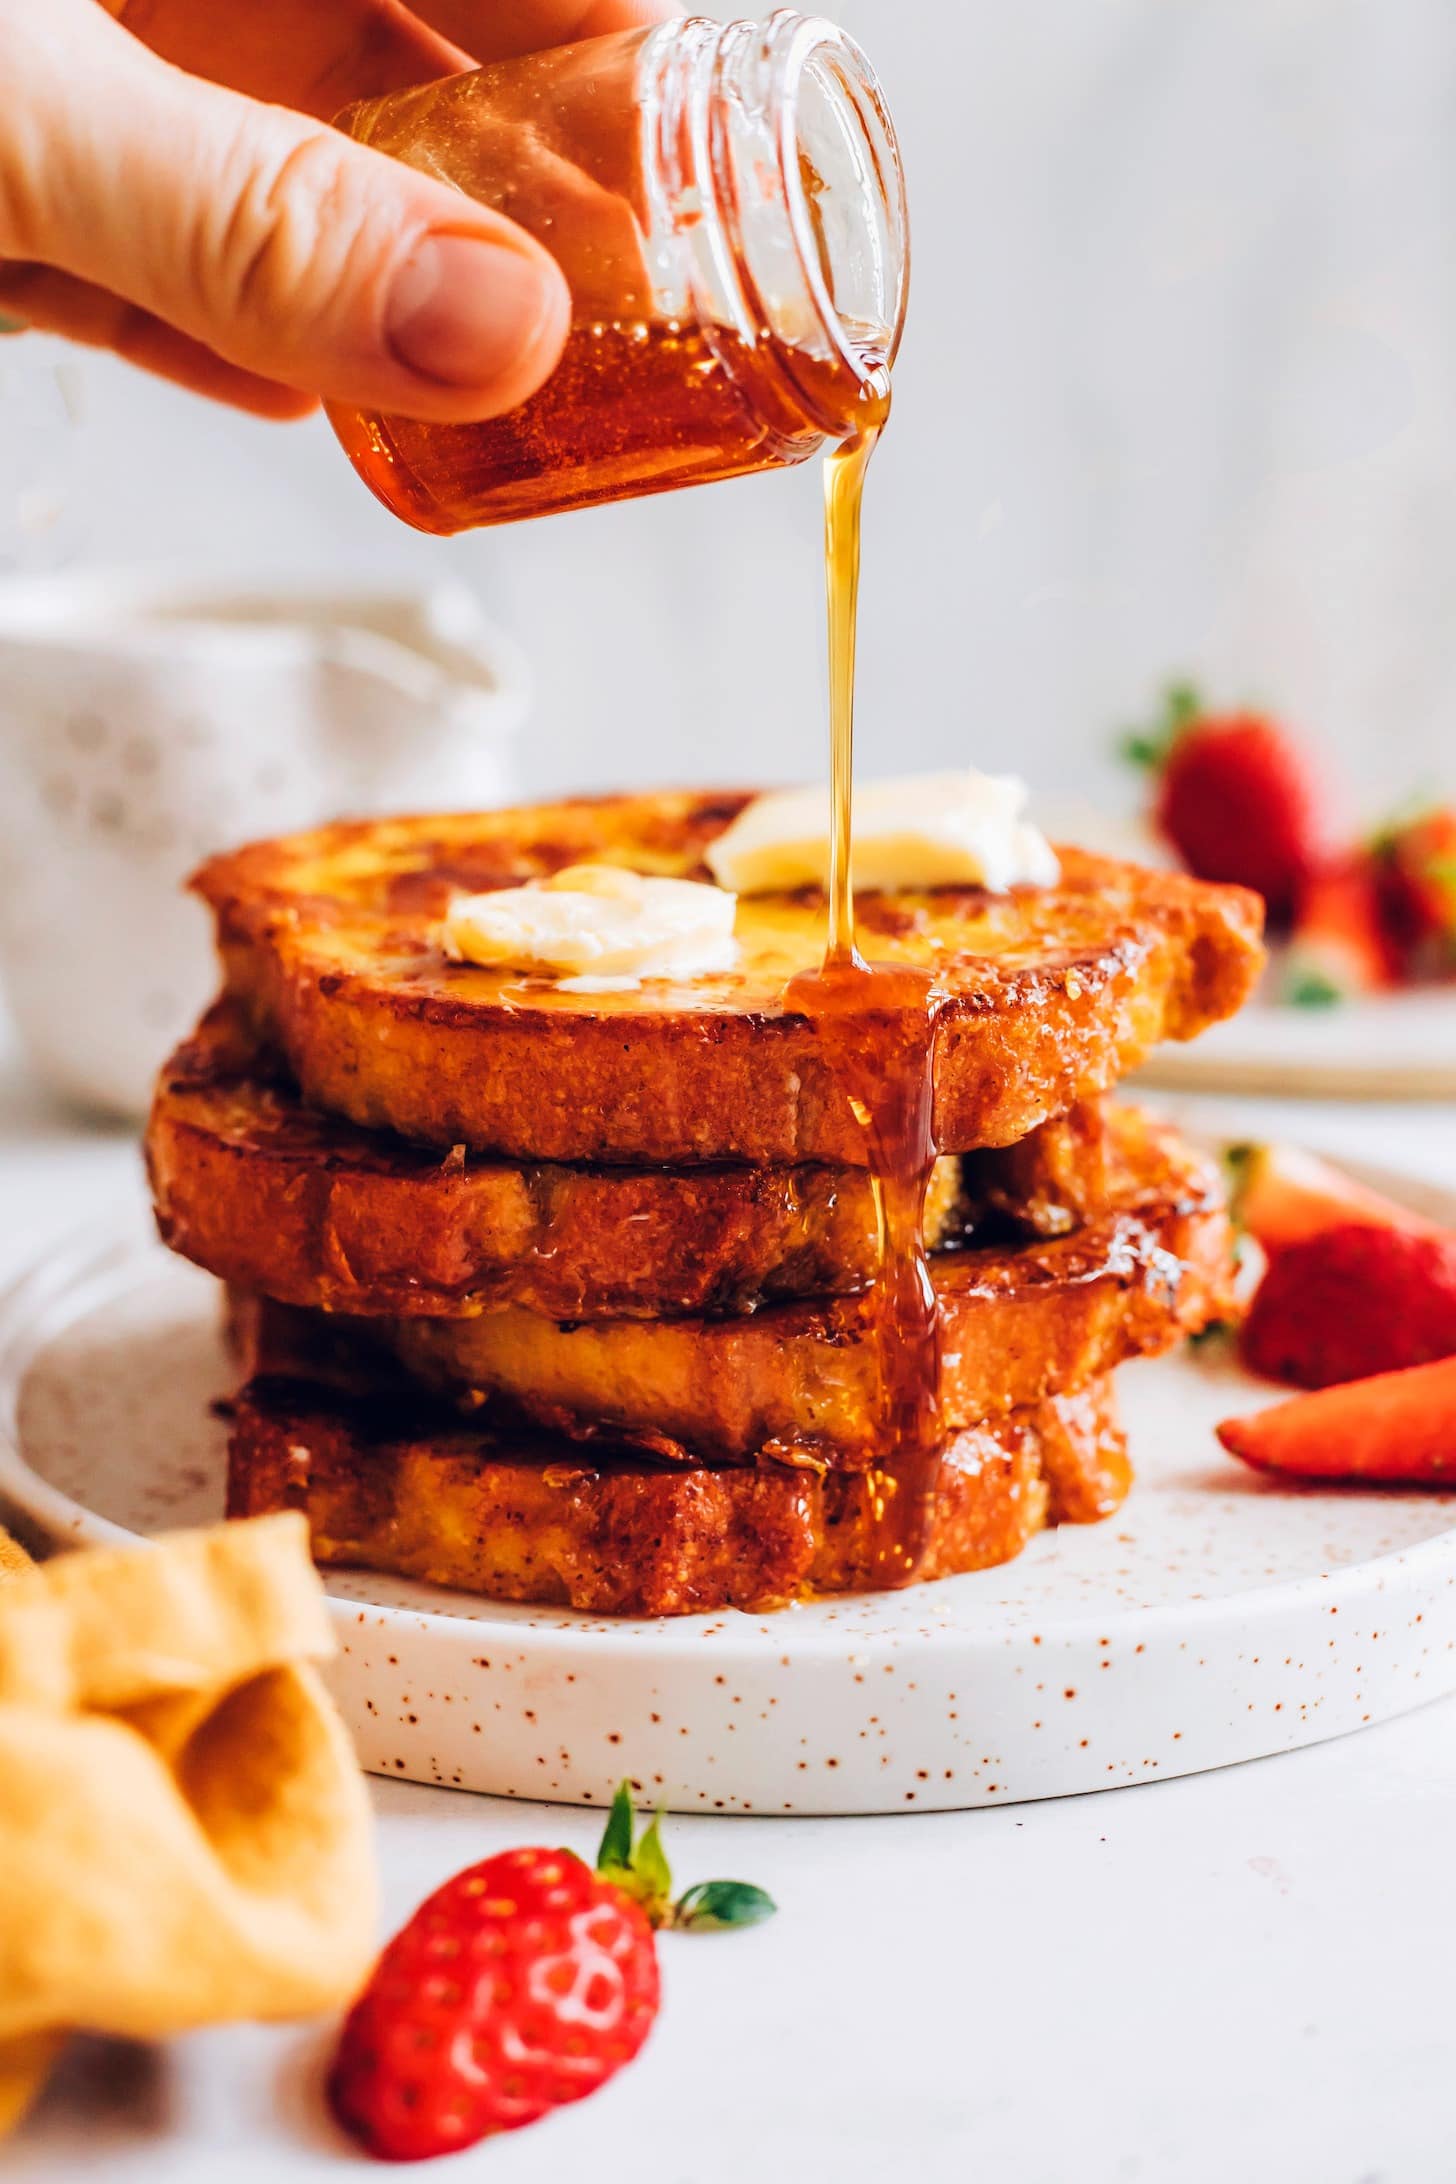 Stack of French toast poured with maple syrup.